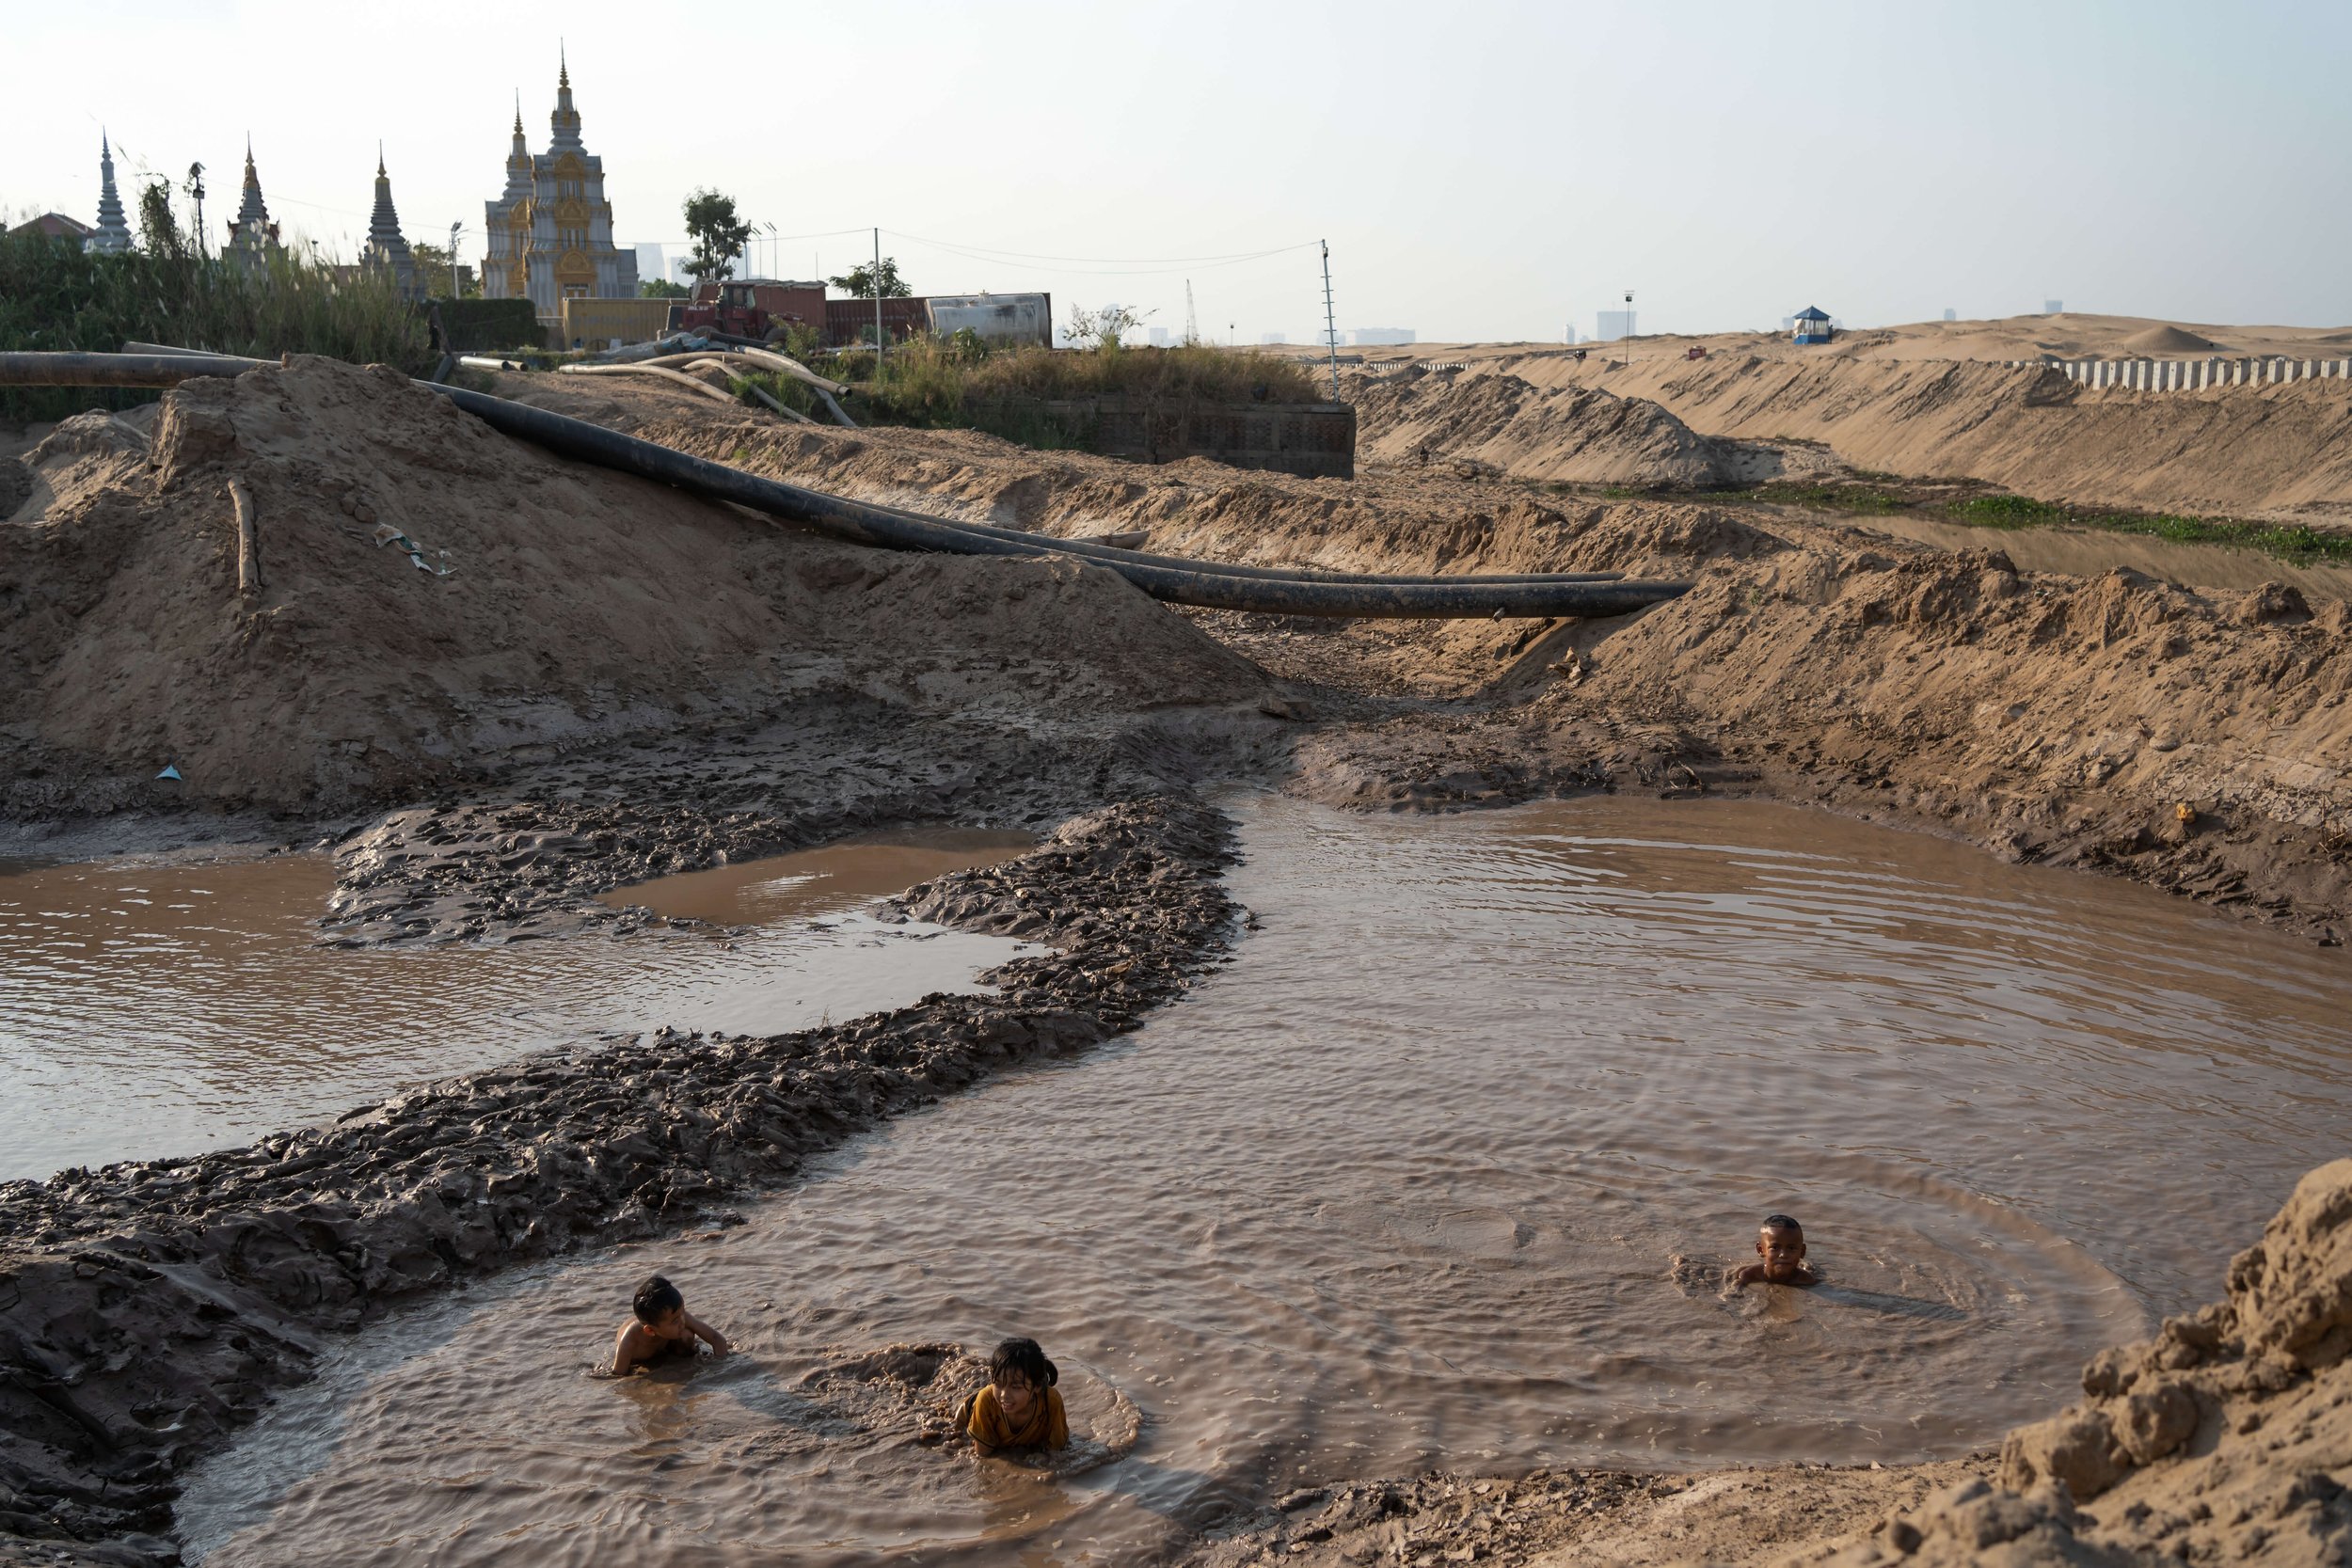  Children play in puddles at a sand deposit site on the outskirts of Phnom Penh. In the background a Buddhist temple sits in front of Koh Norea, a new reclamation project on the Mekong. (Andy Ball/University of Southampton) 